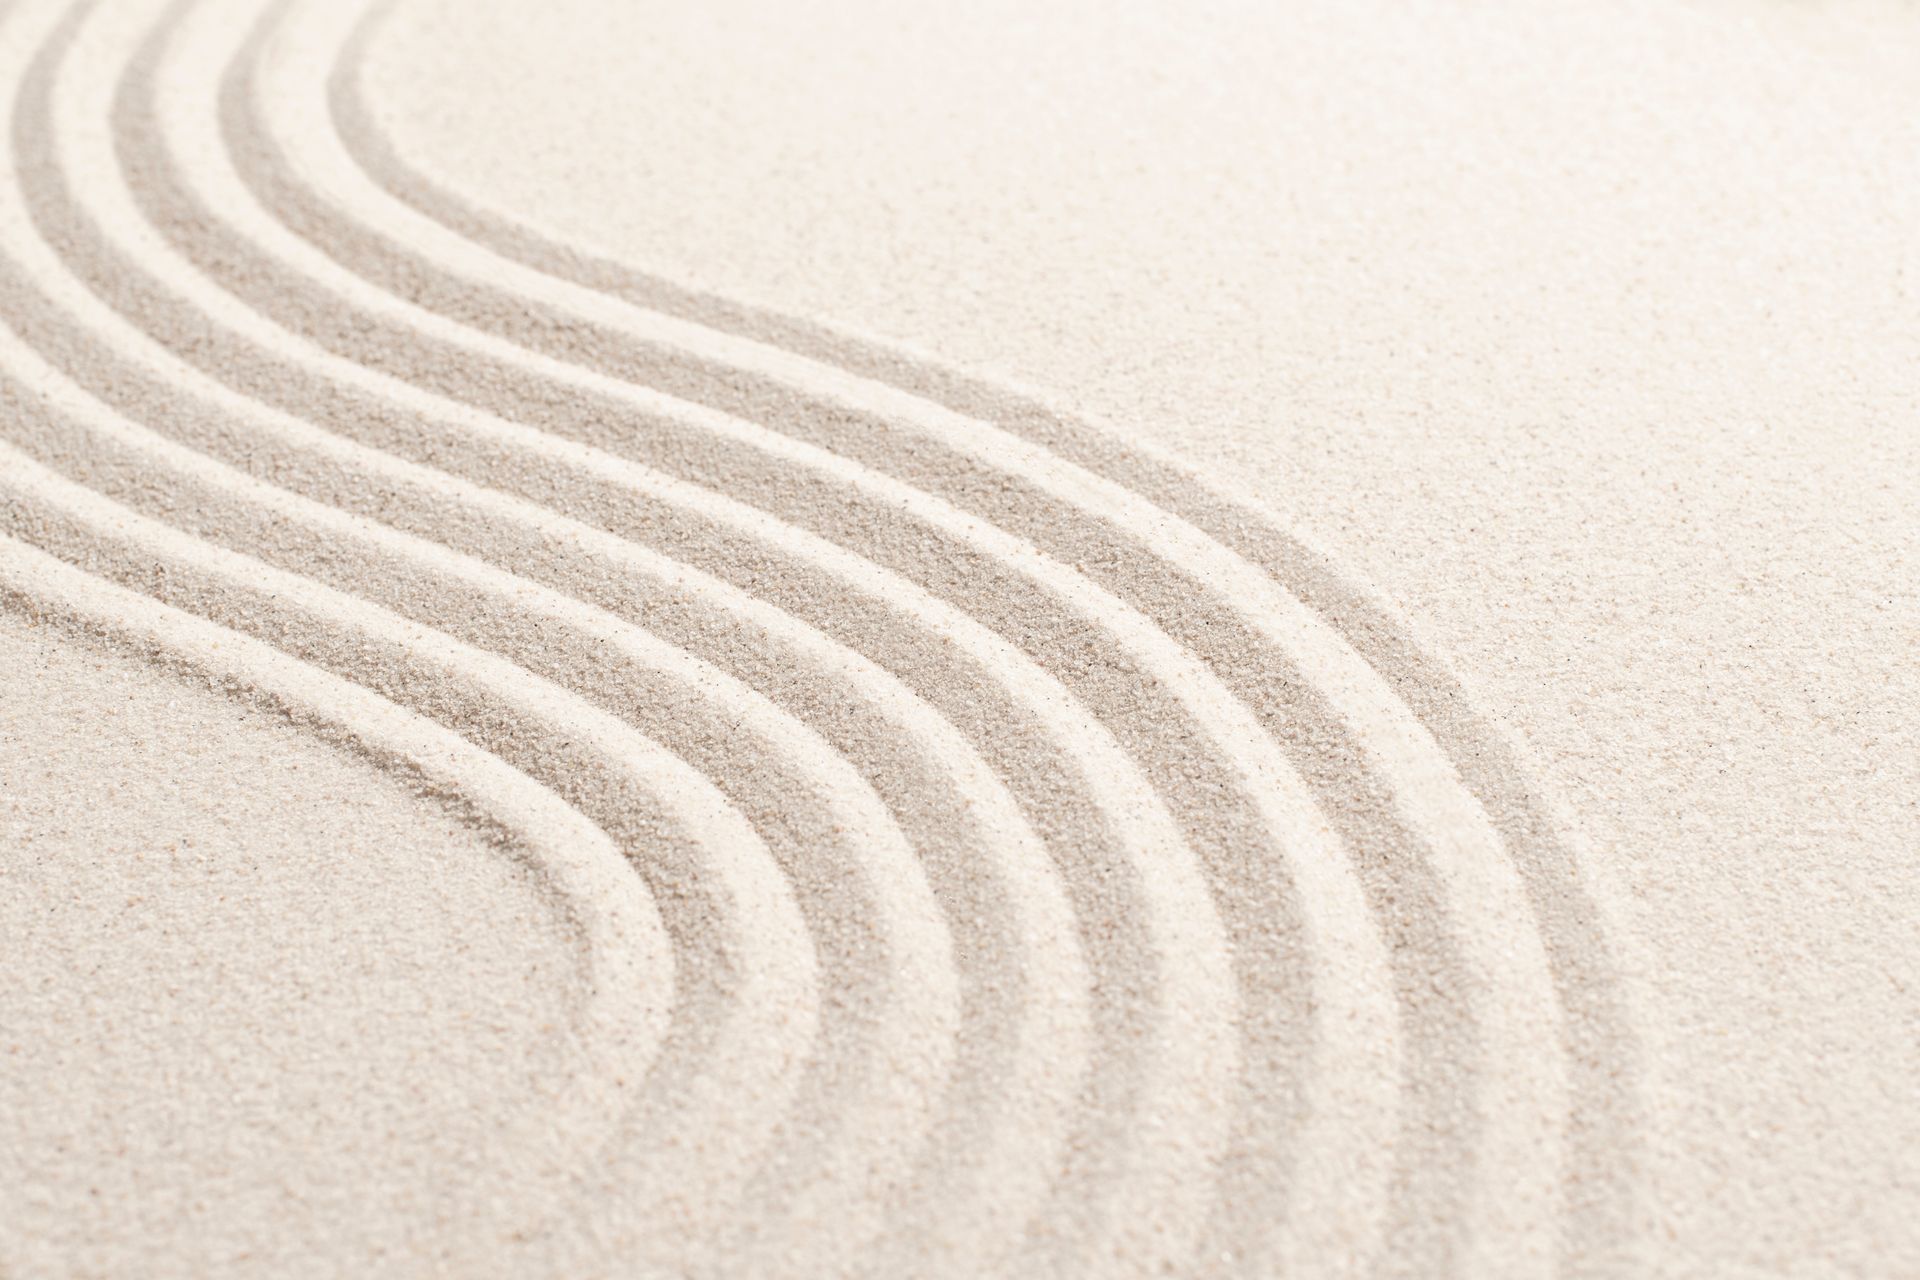 a close up of a sandy surface with a wave pattern